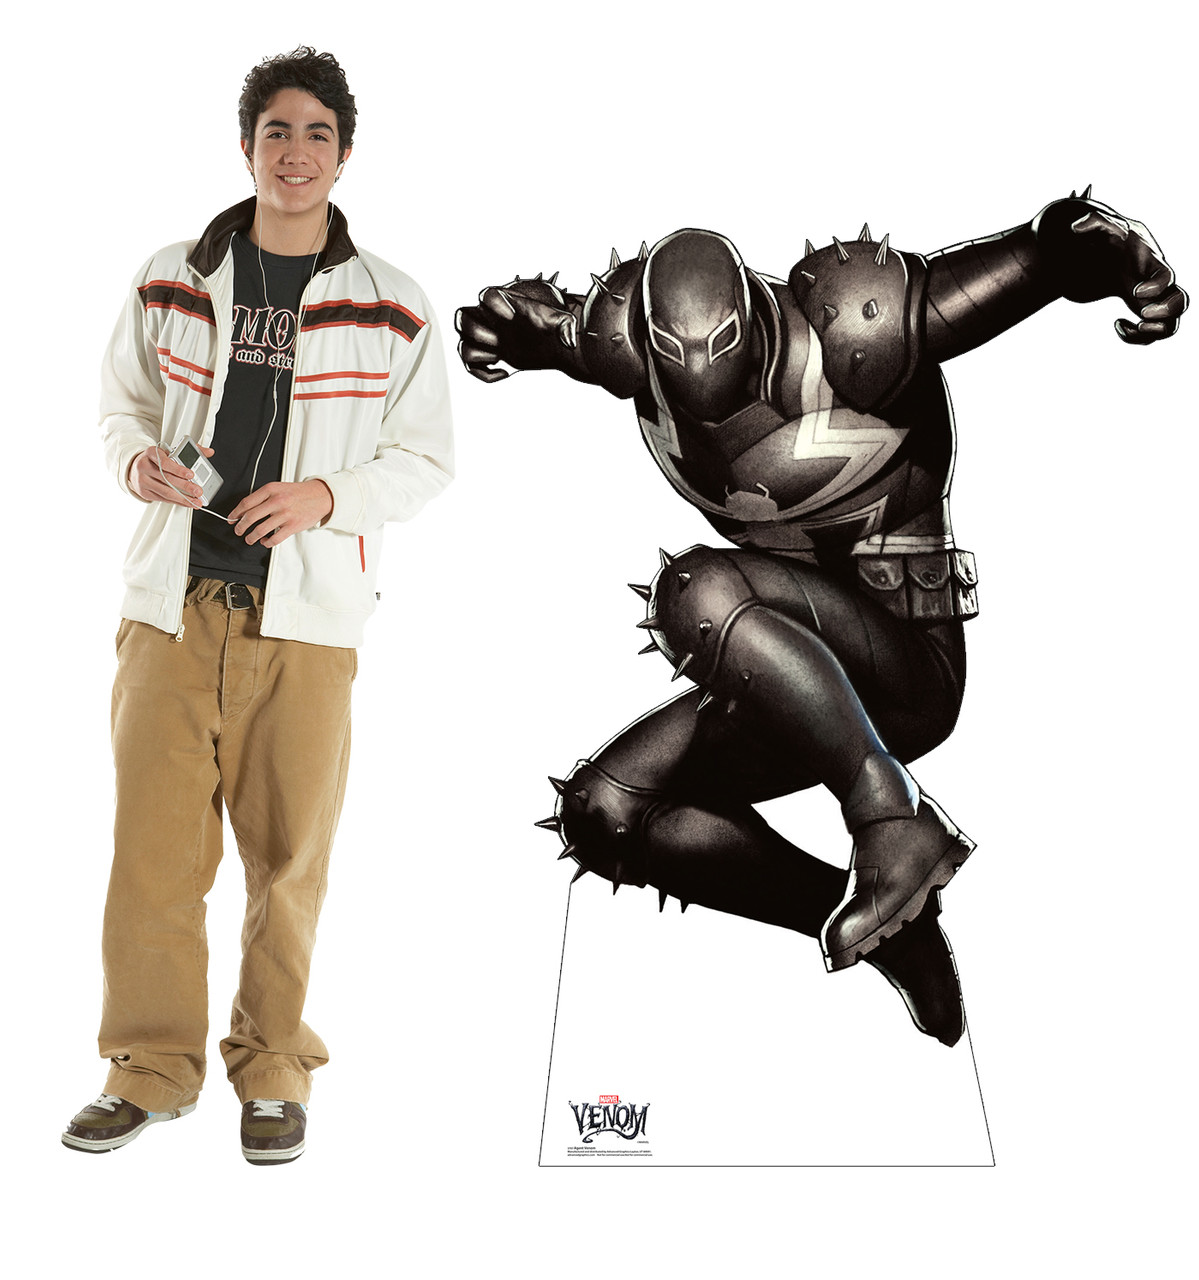 Life-size cardboard standee of Agent Venom from Marvel Classics with model.